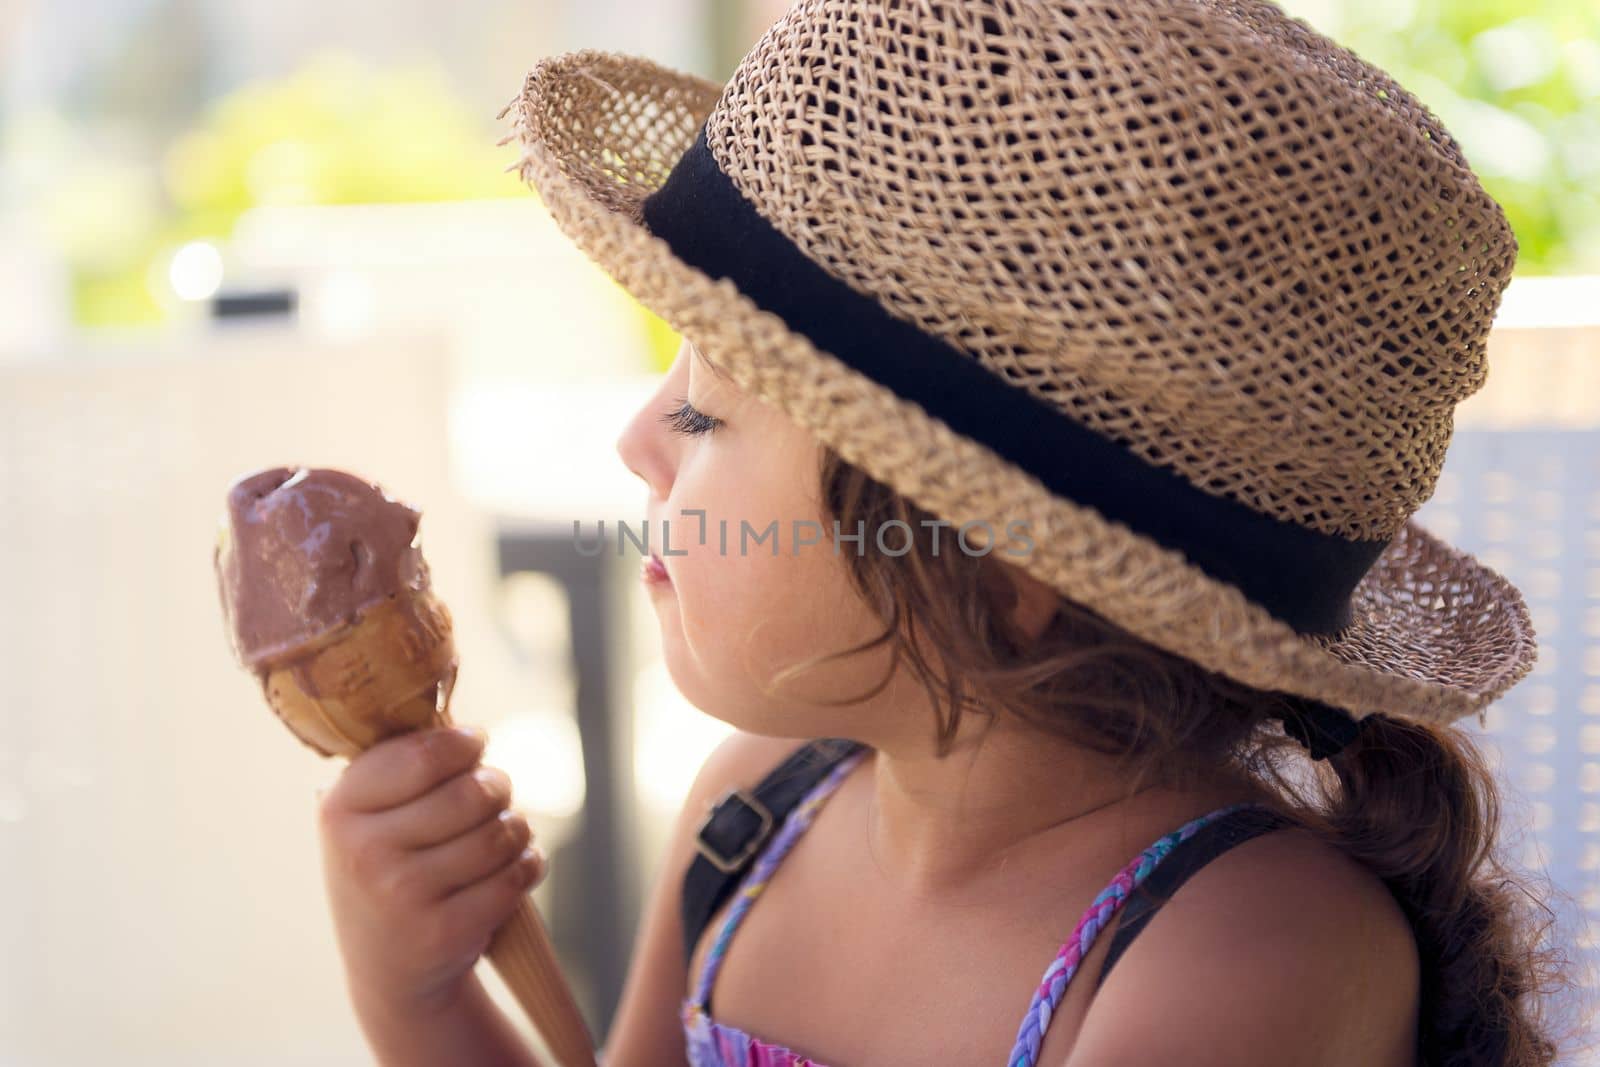 Little girl with a straw hat and a summer dress enjoys the summer heat eating a refreshing cone of chocolate ice cream, it melts in her hand while she looks at it with desire